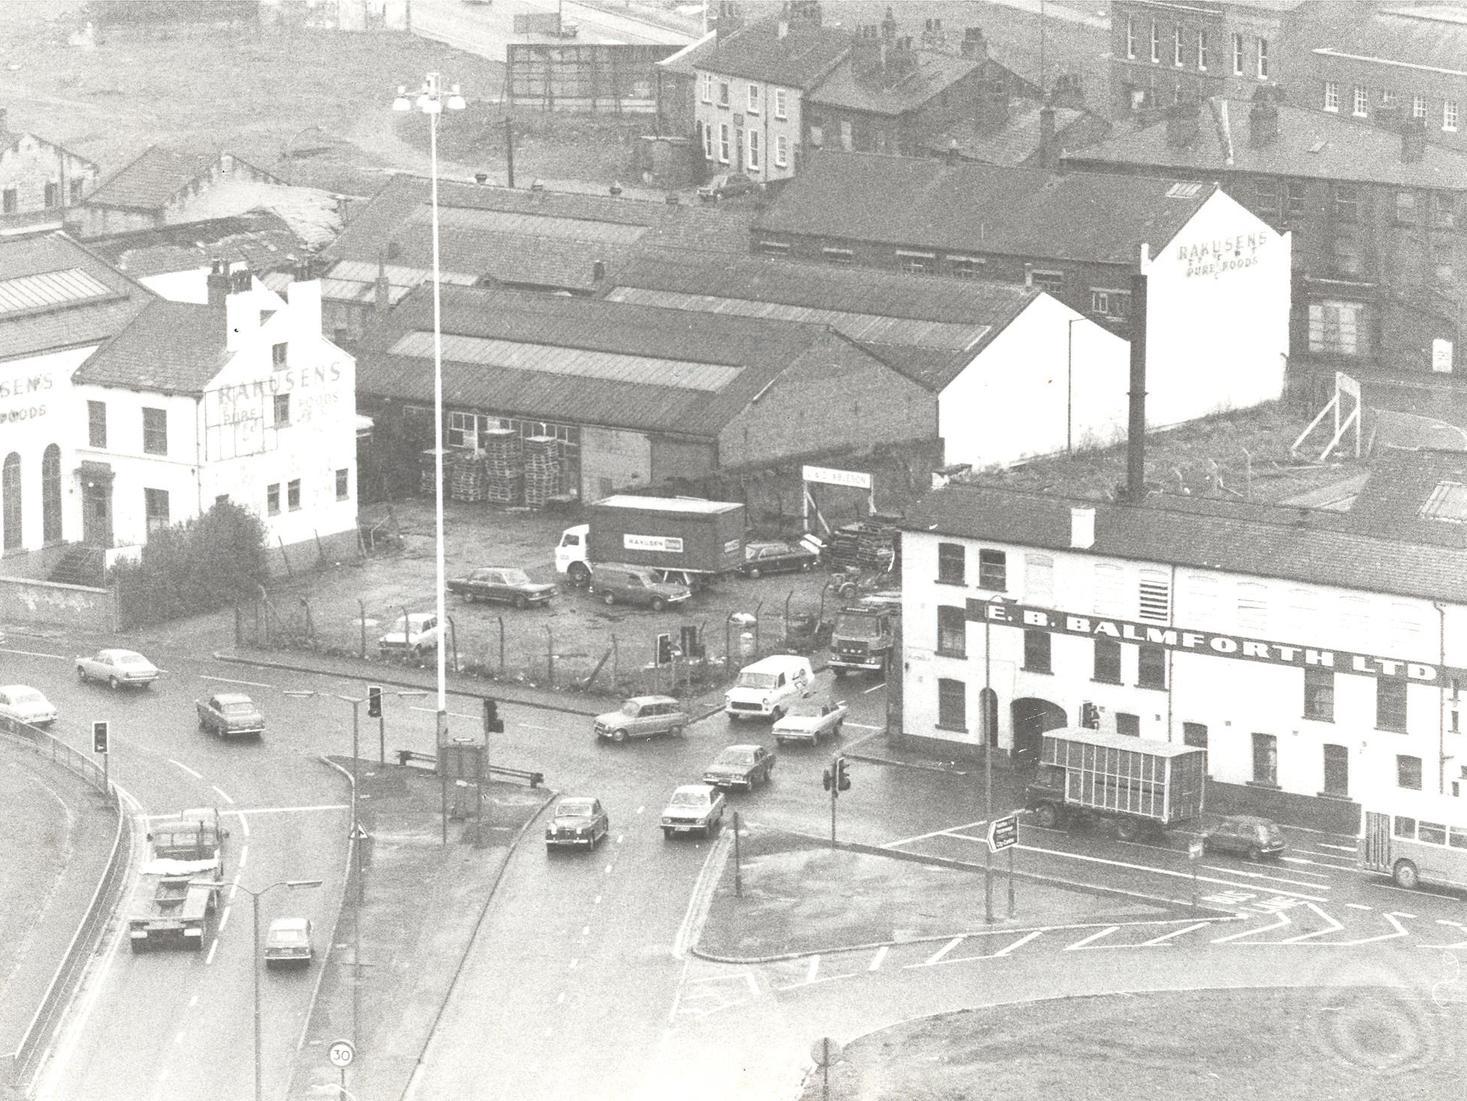 A danger junction in the mid 1970s with drivers travelling from North Street along Meanwood Road not able to see traffic emerging from the Harrogate-Wetherby direction.